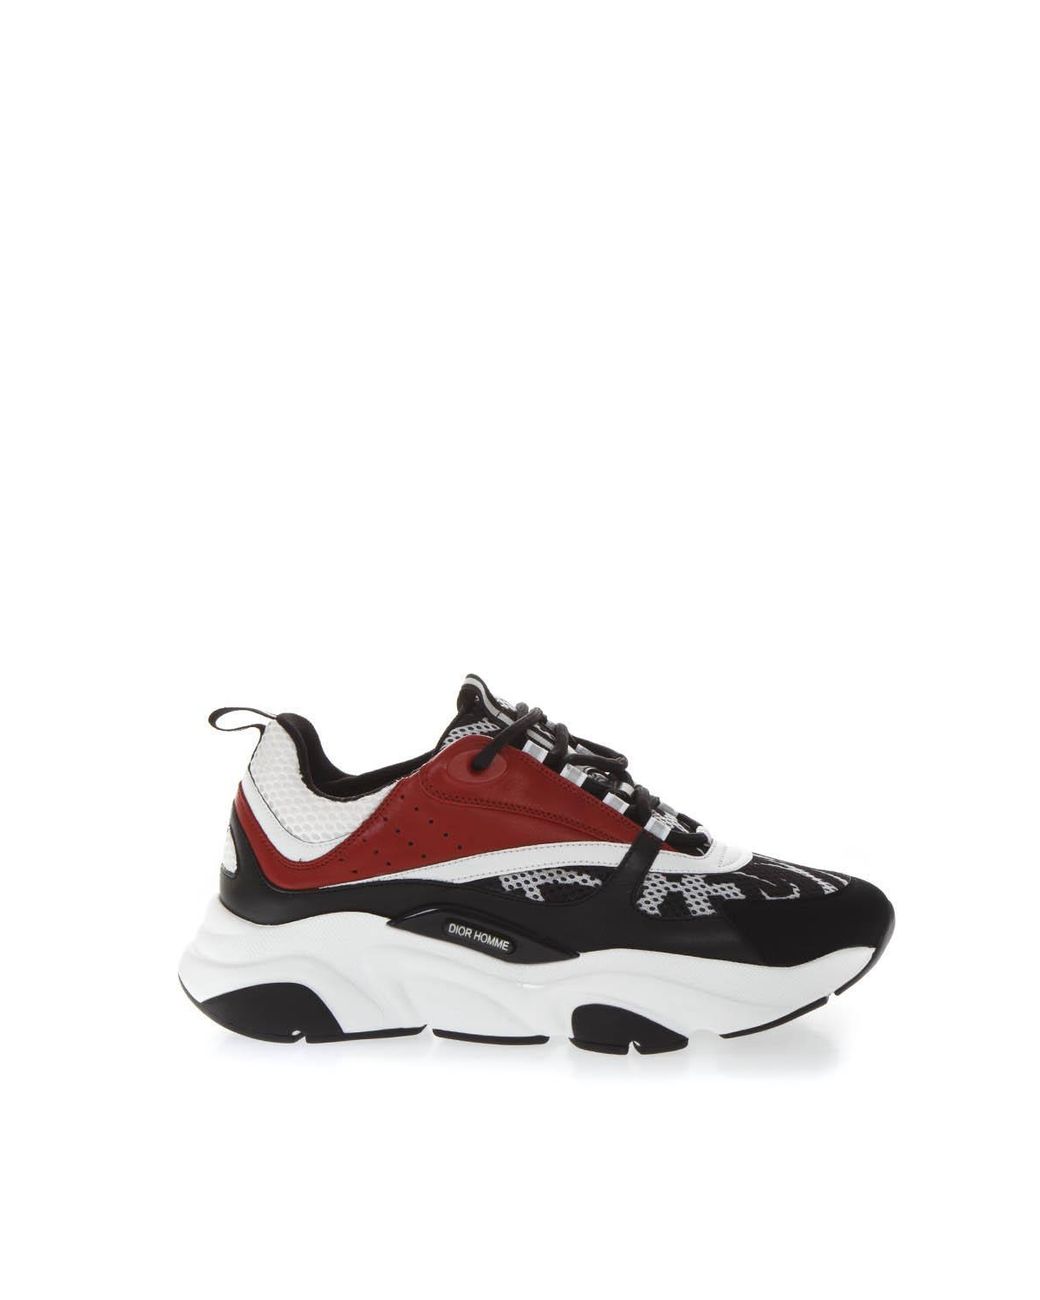 Dior Homme B22 Sneakers for Men | Lyst